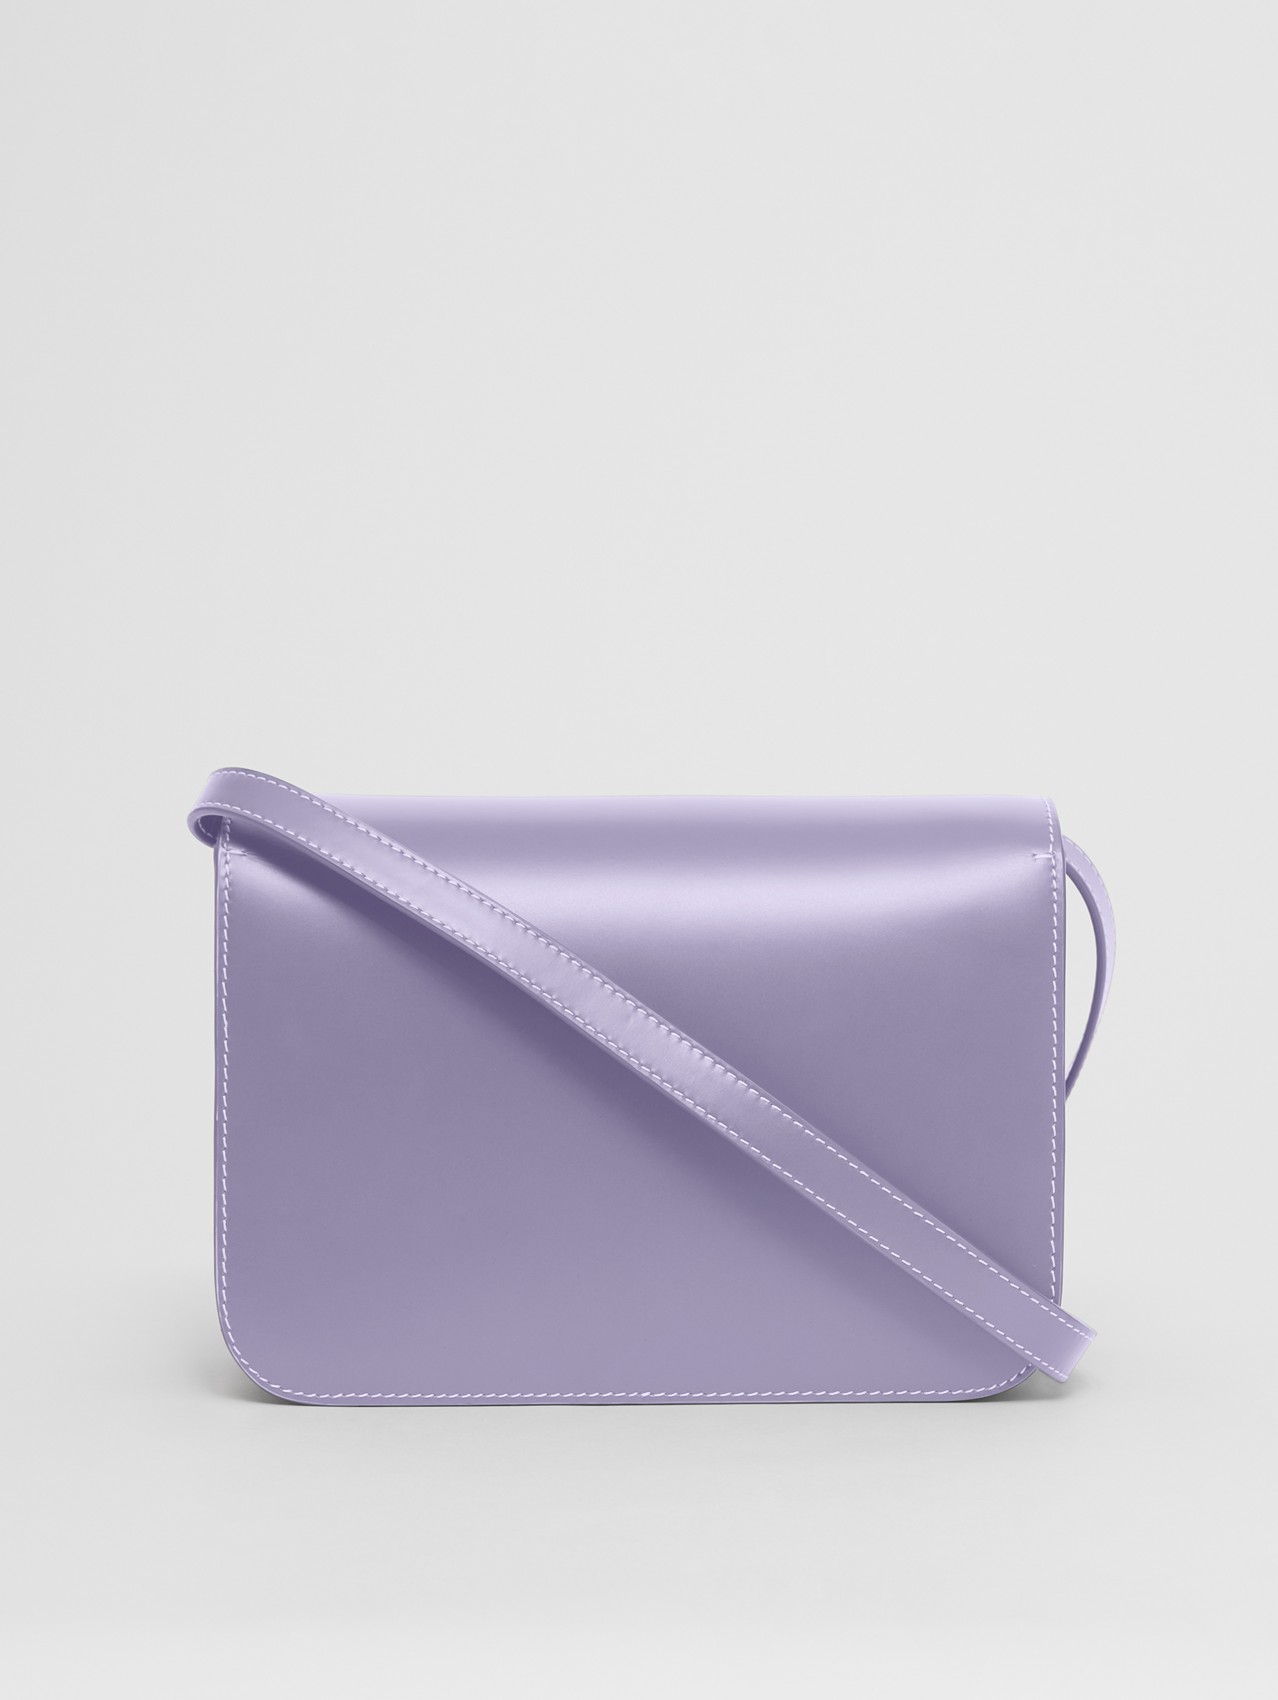 Small Leather TB Bag in Soft Violet